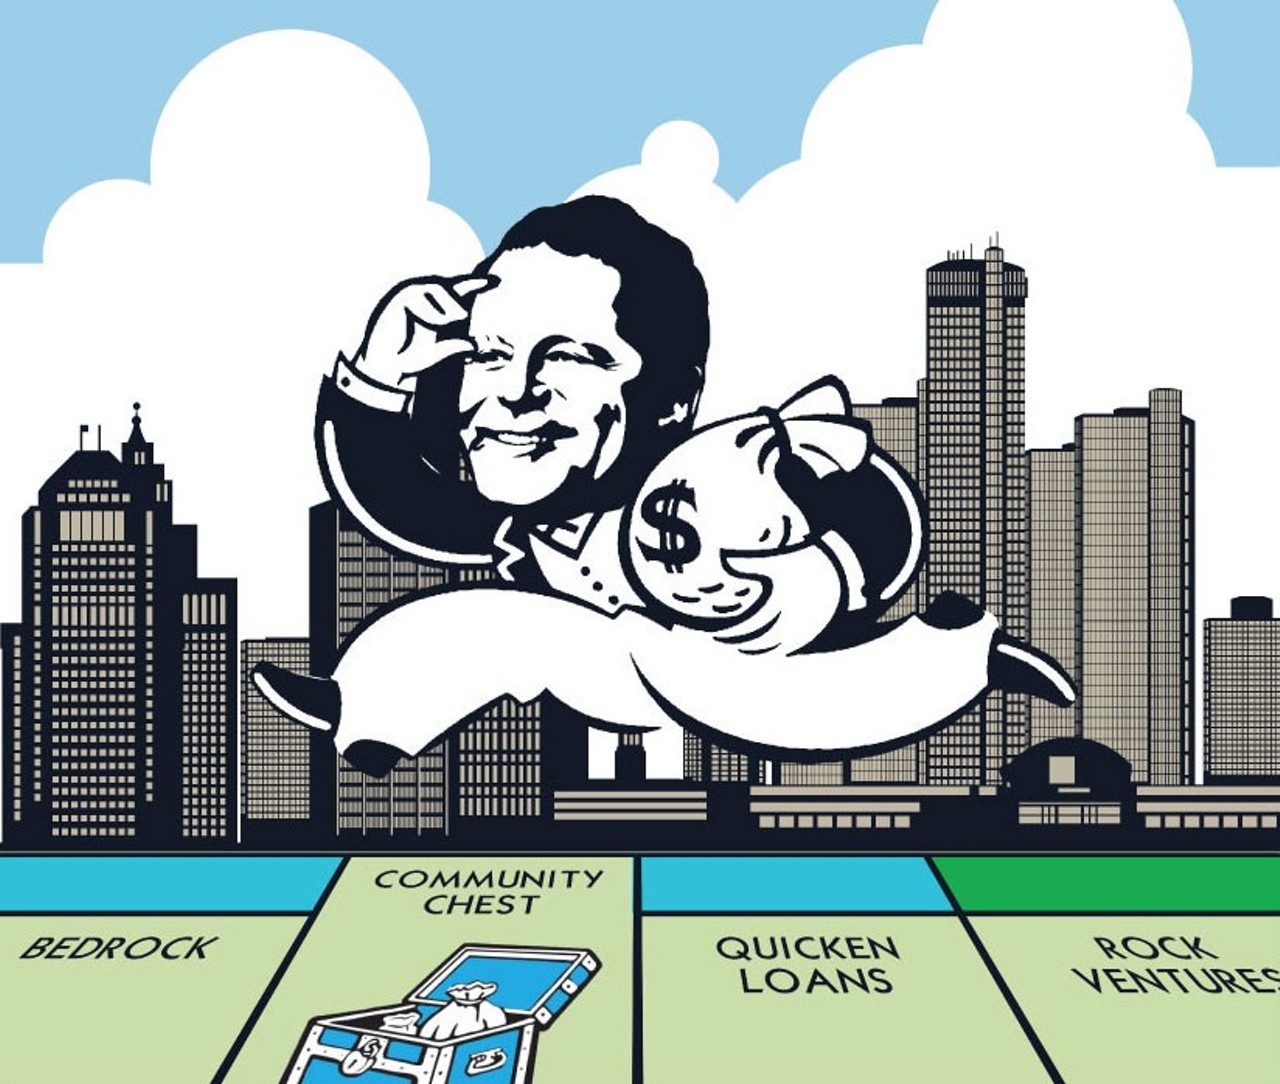 Welfare king &#151; Quicken Loans founder Dan Gilbert wins again. In May, after his cronies flood the state legislature with hundreds of thousands of dollars in campaign donations, Lansing lawmakers approve a series of &#147;transformational brownfield&#148; incentives that will let Gilbert and other wealthy developers in the state get up to $1 billion in incentives for their projects by siphoning the income taxes of those who live and work in their new buildings. The approval sets the stage for profound cash grab by Gilbert, though in order to get lawmakers to approve the giveaway, he has to convince them the money could go to other projects around the state. In the fall, it emerges that Gilbert would immediately hit up the $1 billion pot that&#146;s supposed to last five years for $250 million in order to help bankroll a new skyscraper and some other stuff he&#146;s building in an already-gleaming downtown Detroit. Let&#146;s see how far that money goes in other Michigan cities &#151; after all, it&#146;s residents across the state that are missing out on tax money that has historically gone to funding things like schools and road improvements. All this for a guy with multiple lawsuits against him &#151; and that investigations show holds a healthy level of responsibility for the mortgage crisis that catapulted the country into the Great Recession.
Illustration by Robert Nixon.